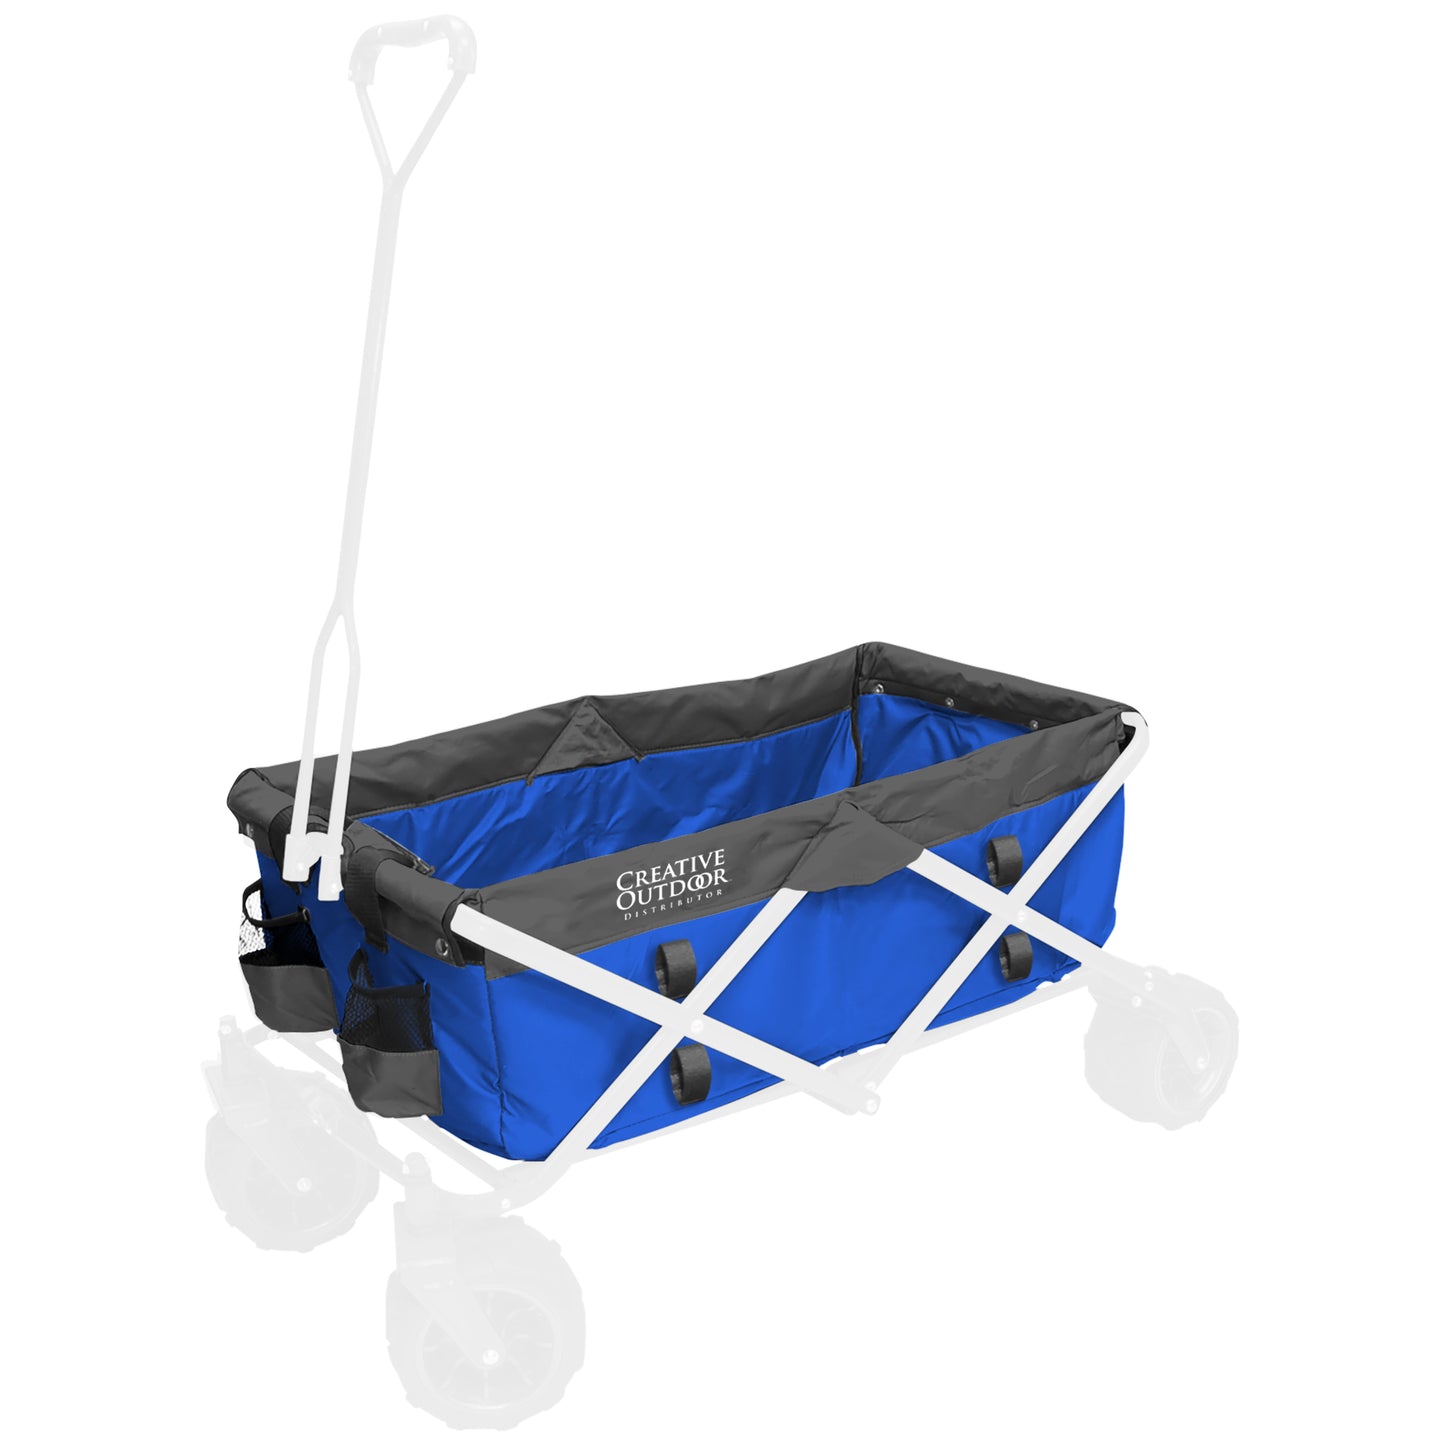 All-Terrain Folding Wagon Replacement Fabric - BLUE/GRAY